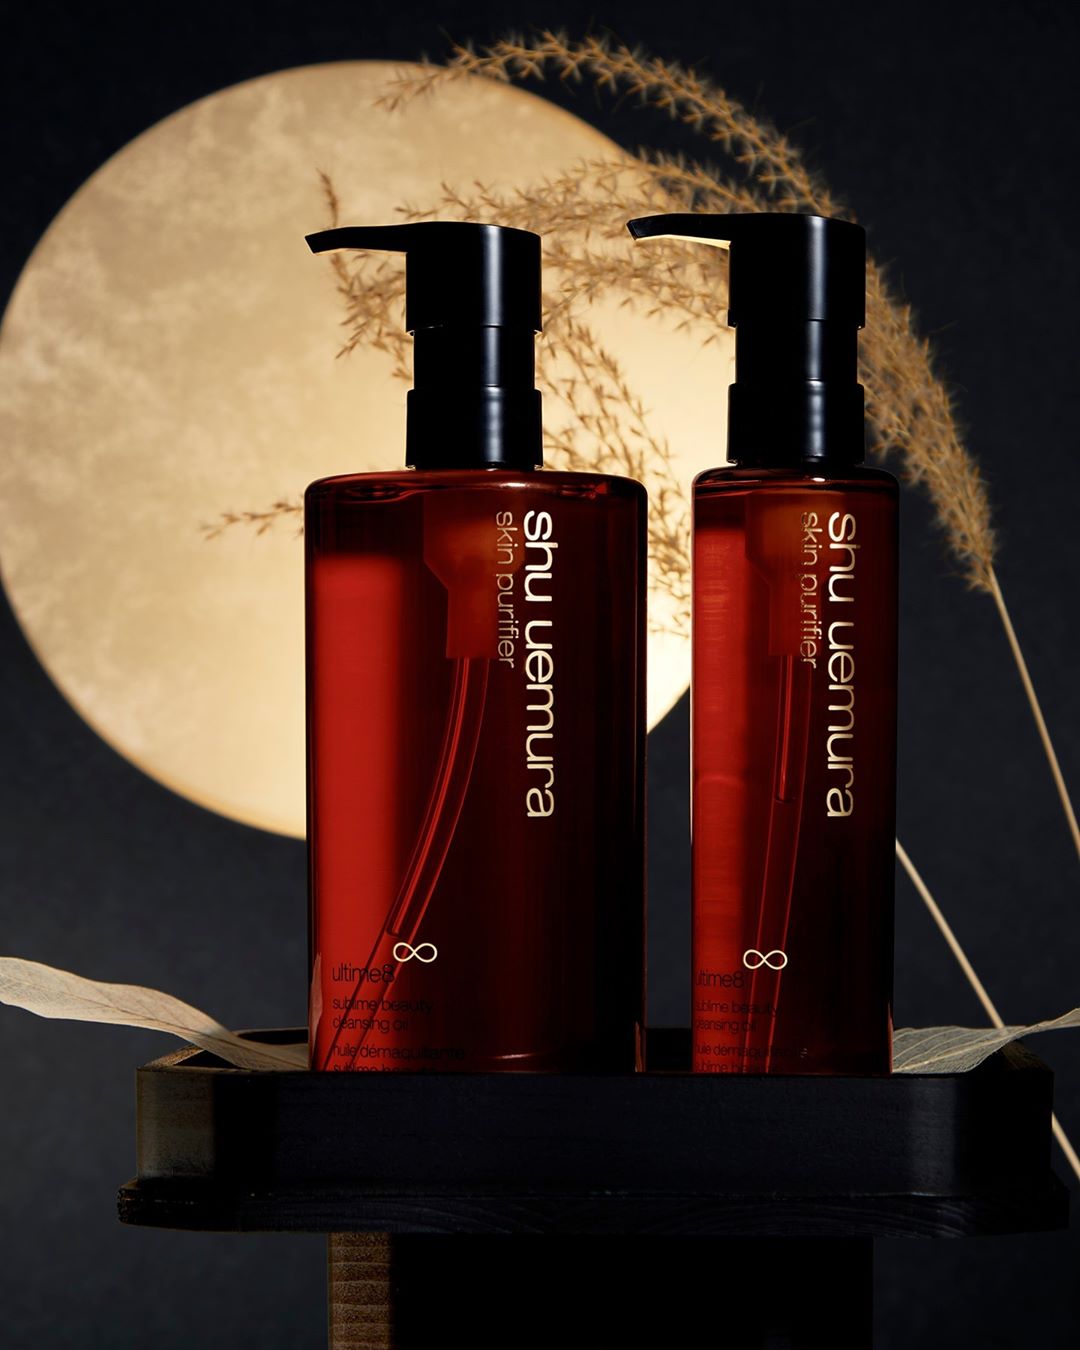 shu uemura - celebrate otsukimi (moon-viewing festival) with delicious dango (rice cakes) and skin pampering. 🍡✨ #shuuemura #beyondcleansing #ultime8⁠